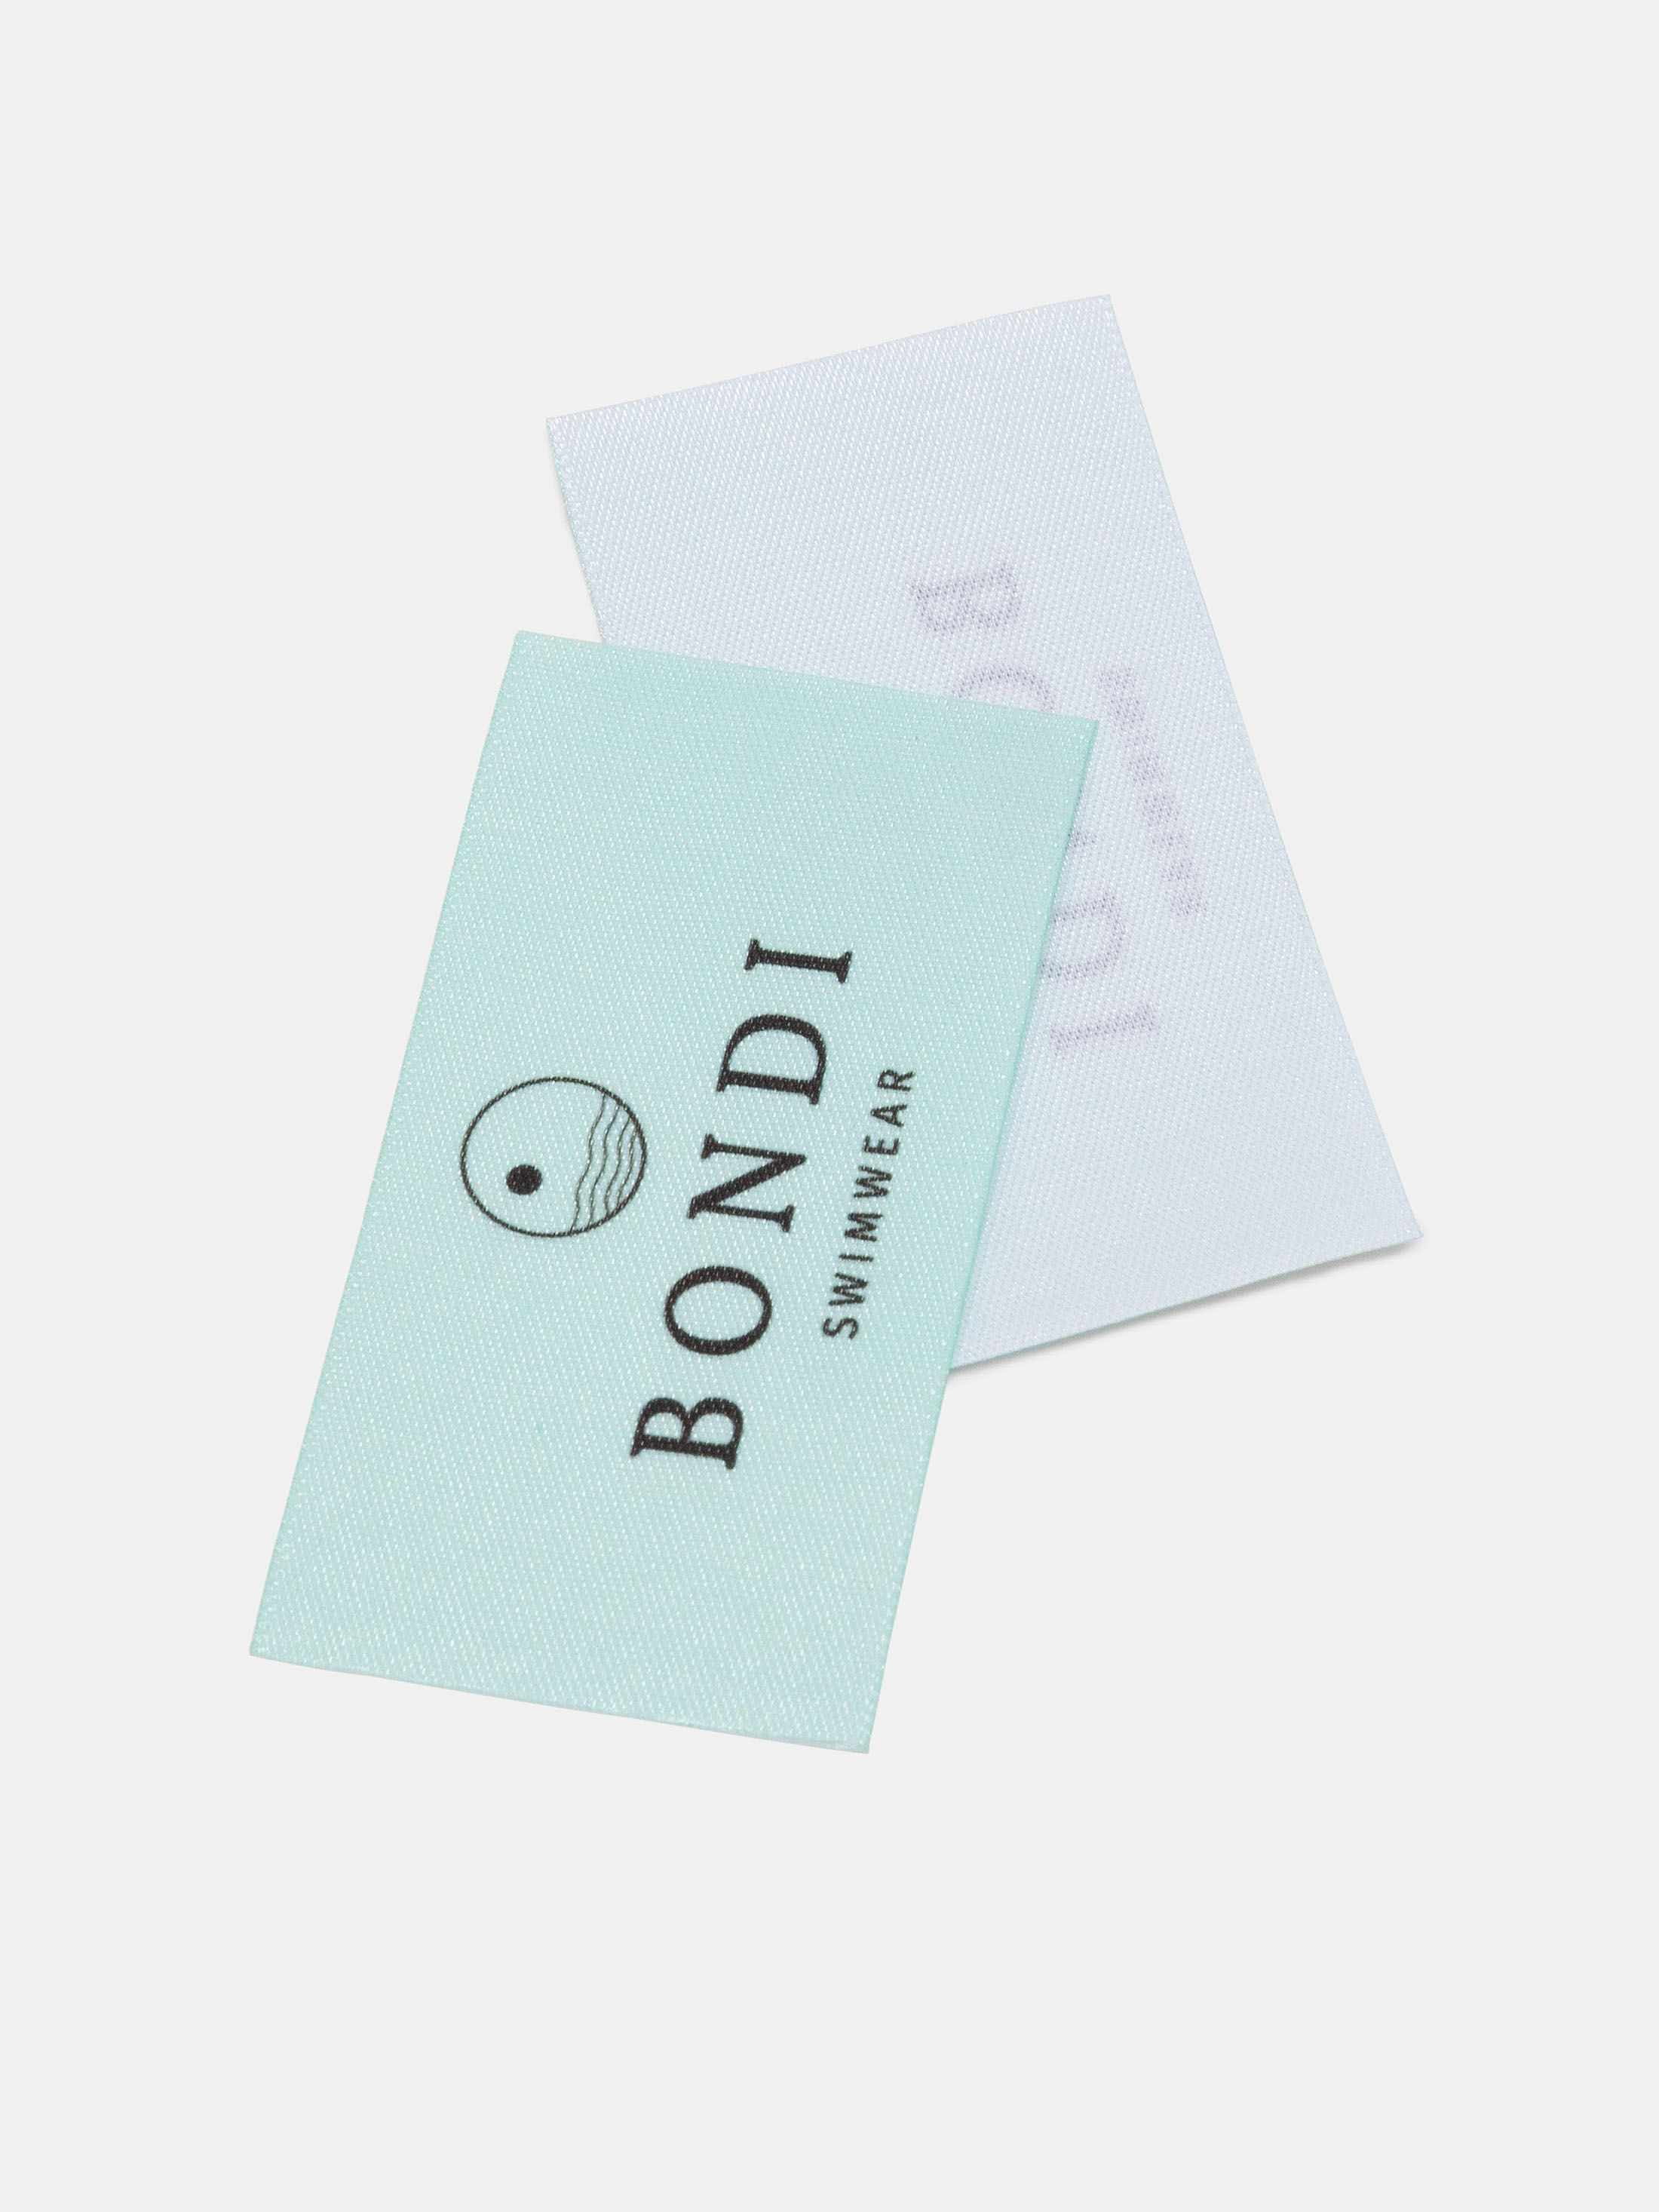 woven flat lay labels